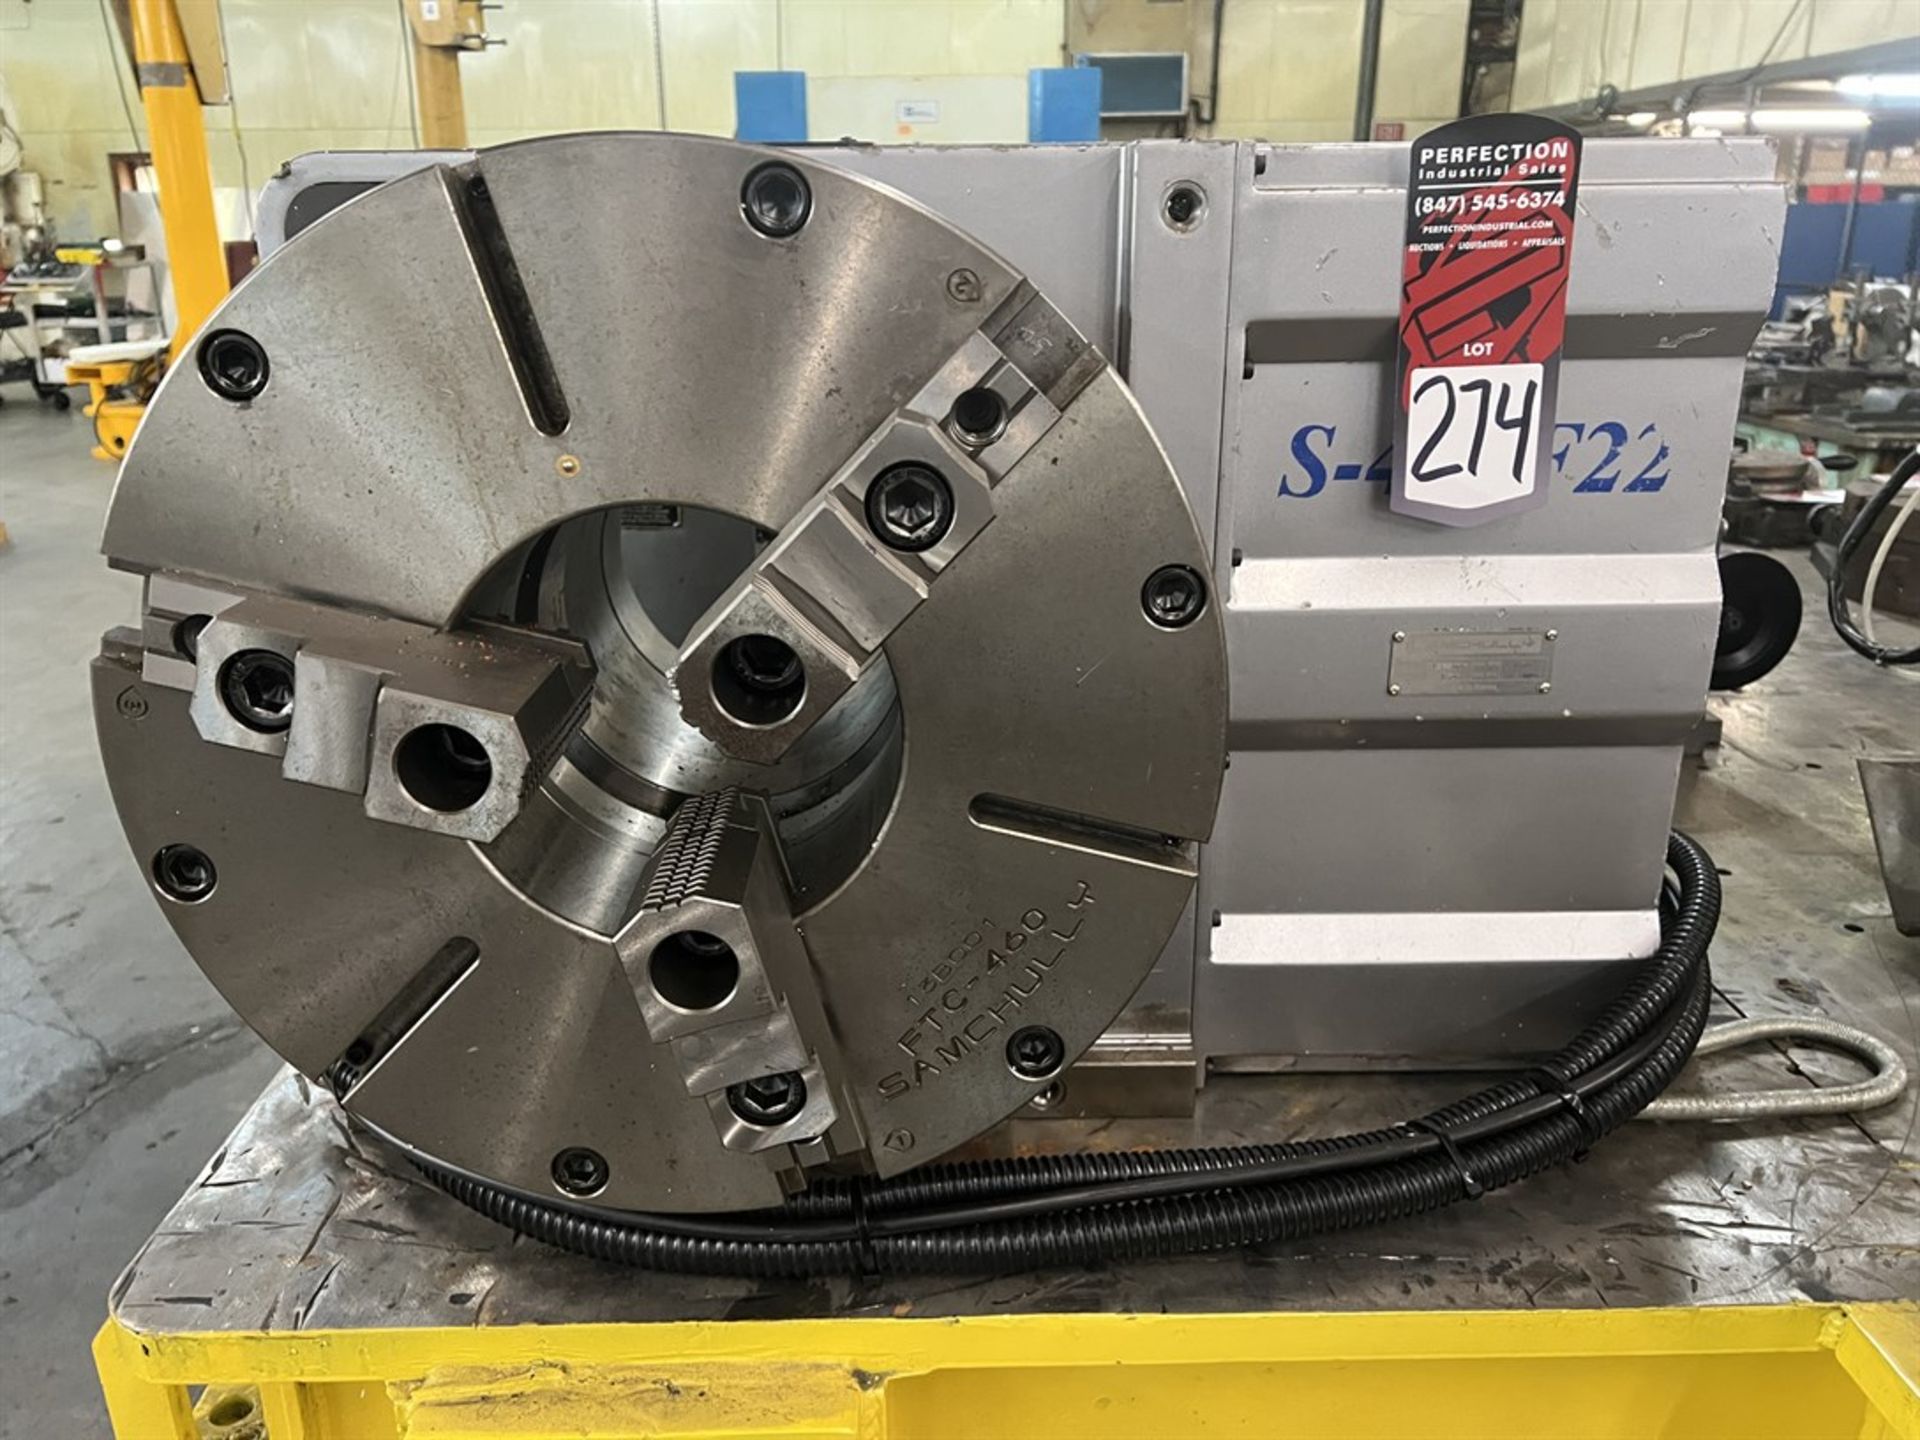 SAMCHULLY S-430F22 4th Axis Rotary Table, s/n 1210001, w/ 18" 3-Jaw Chuck w/ 7-1/2" Hole (Machine